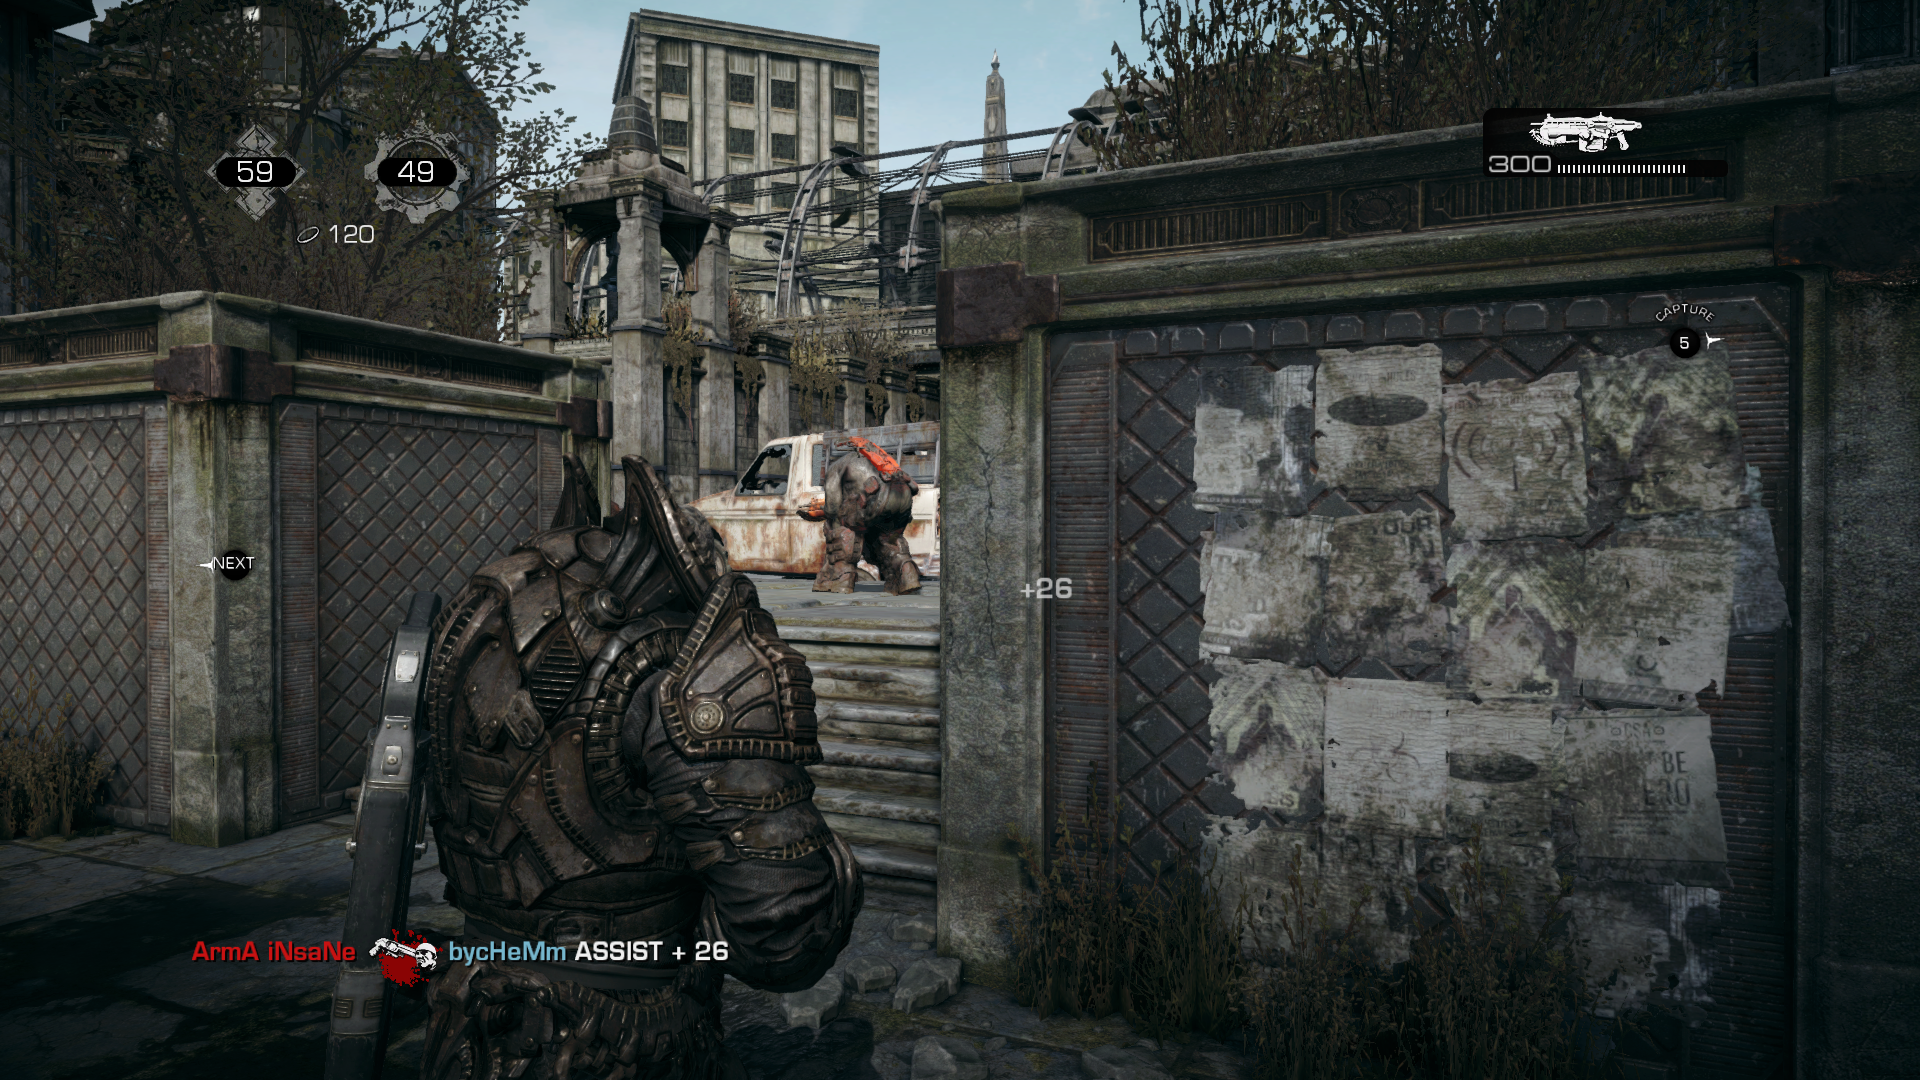 gears of war pc game patch